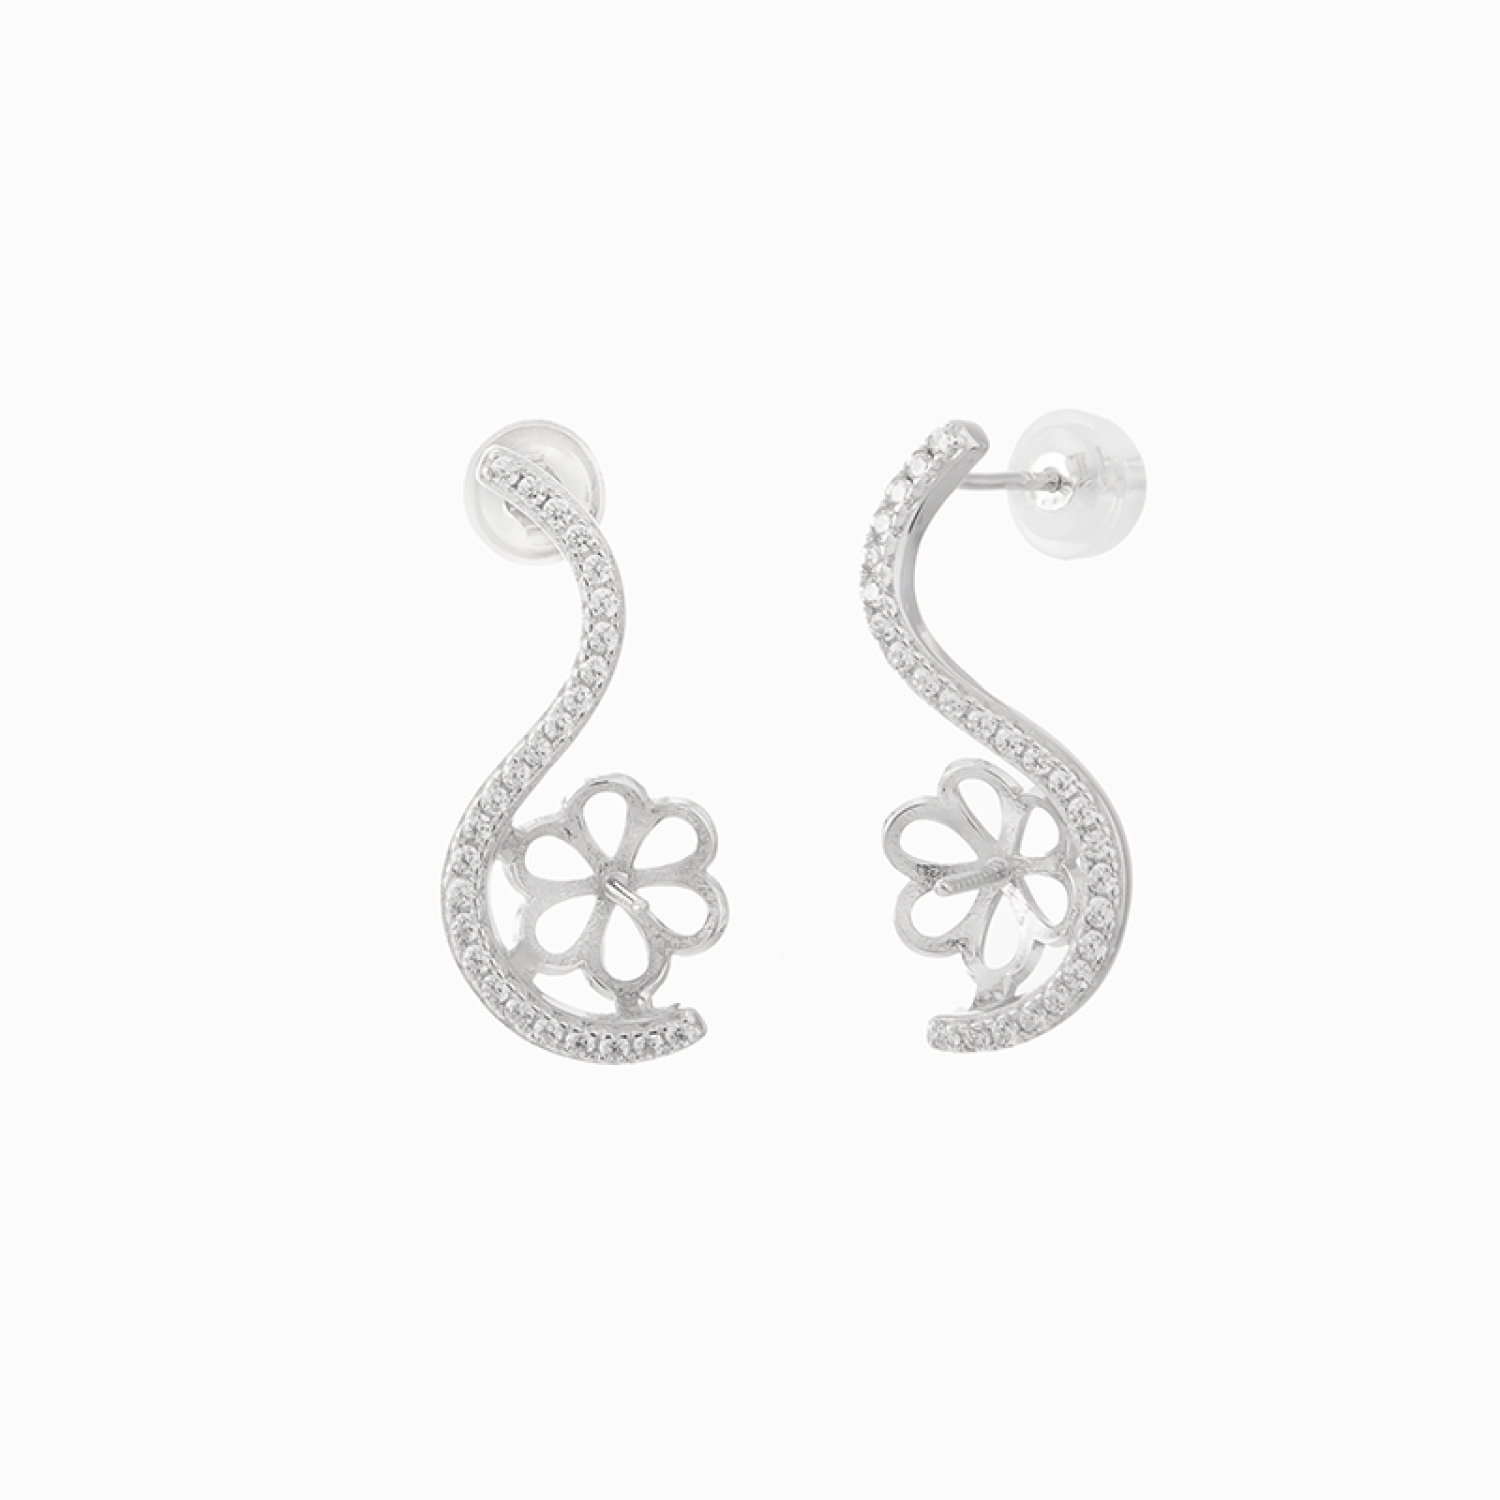 S shaped pave CZ with freshwater pearl size 10mm stud earring fitting